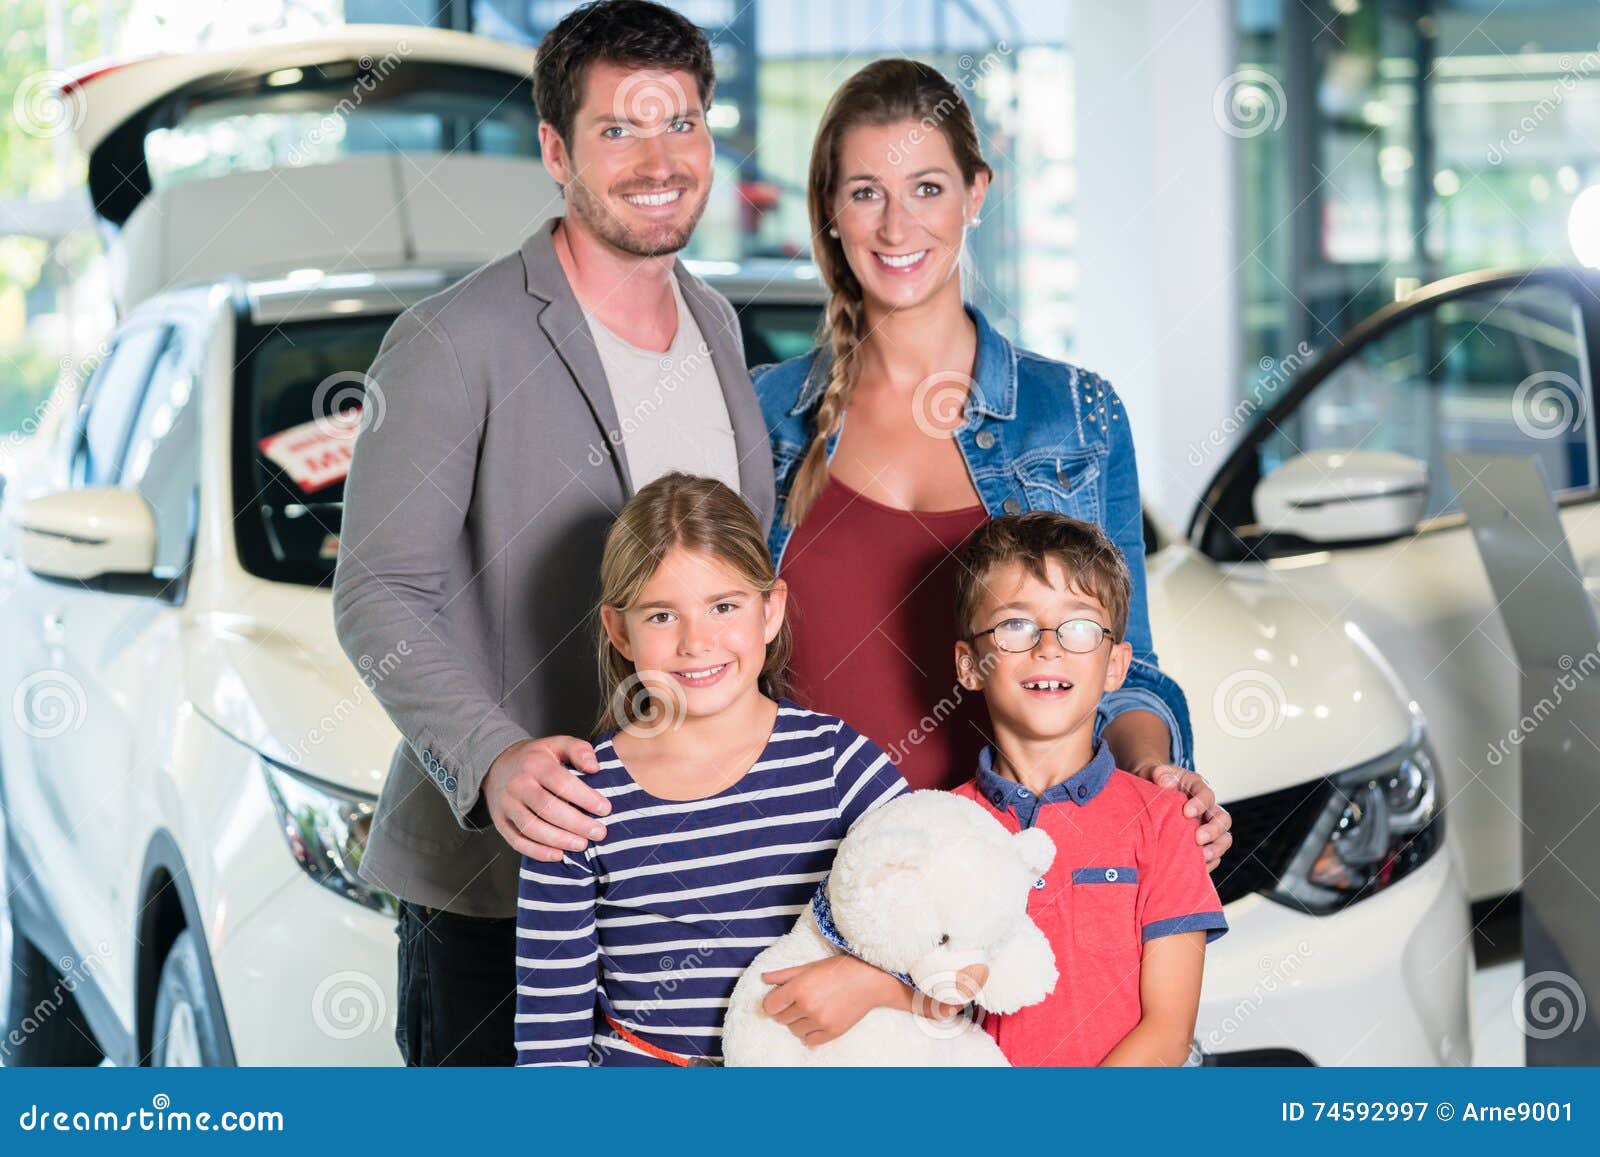 family with children buying new car at auto dealership